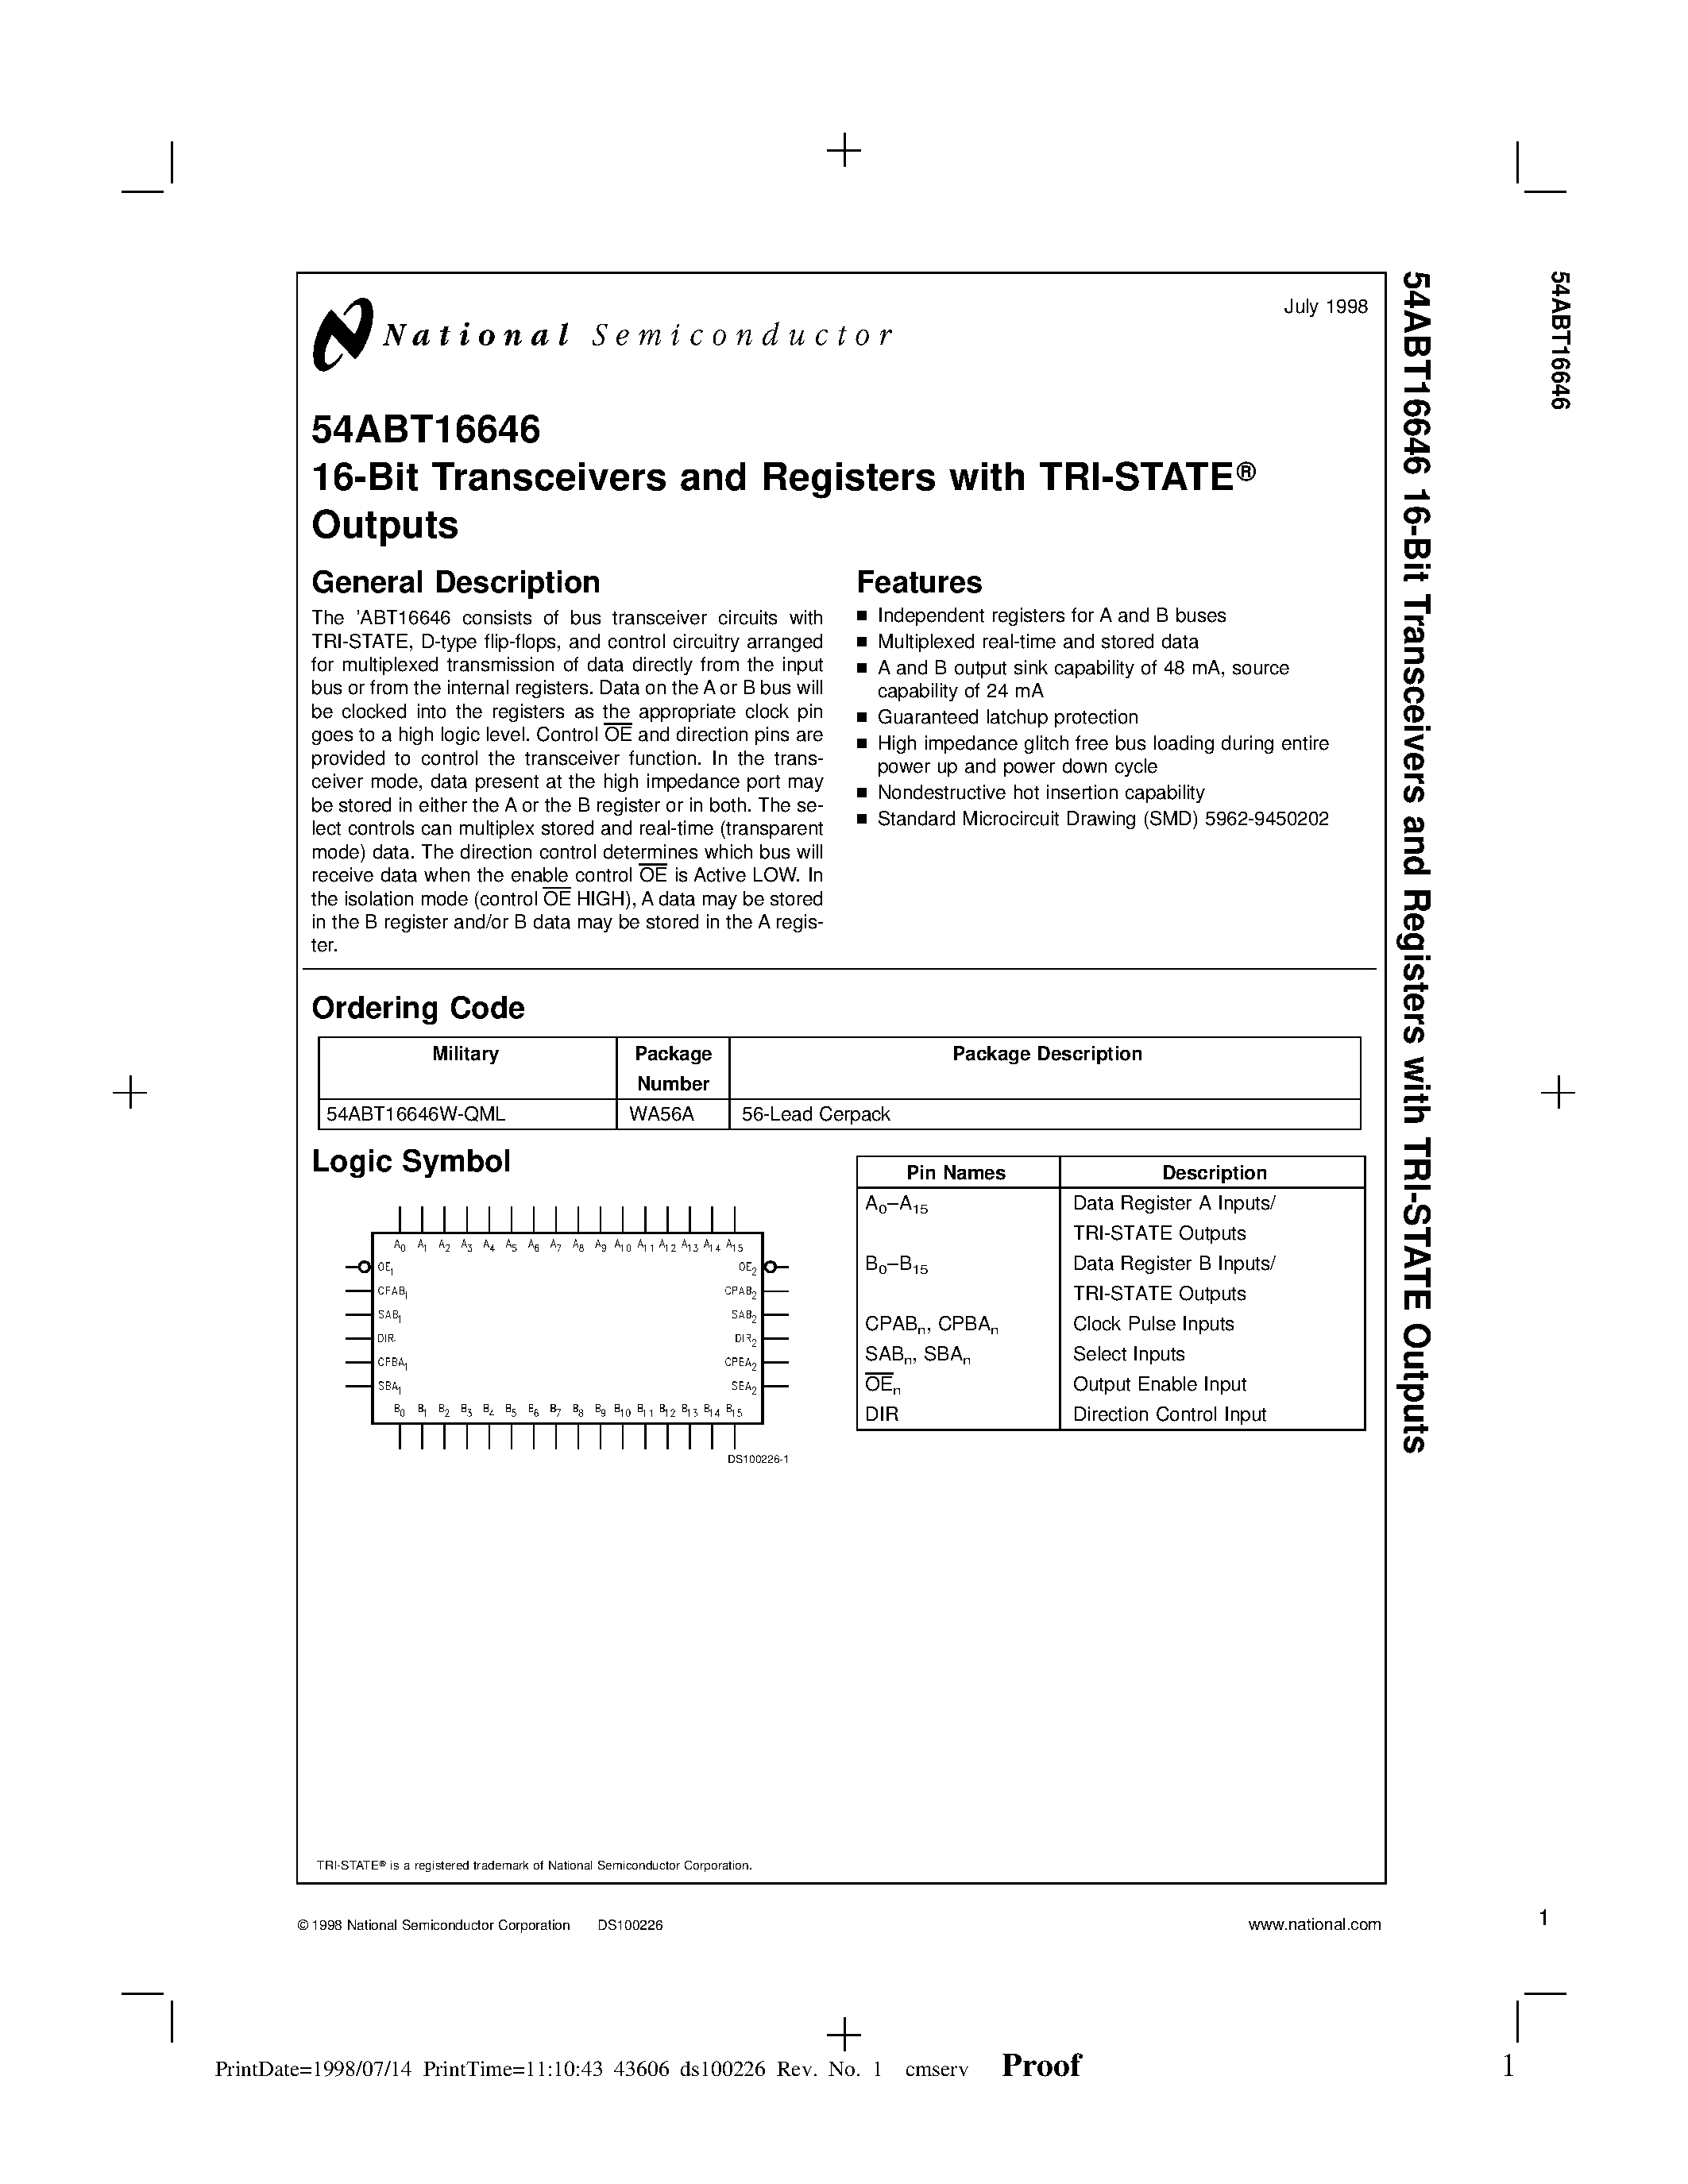 Datasheet 54ABT16646 - 16-Bit Transceivers and Registers with TRI-STATE Outputs page 1